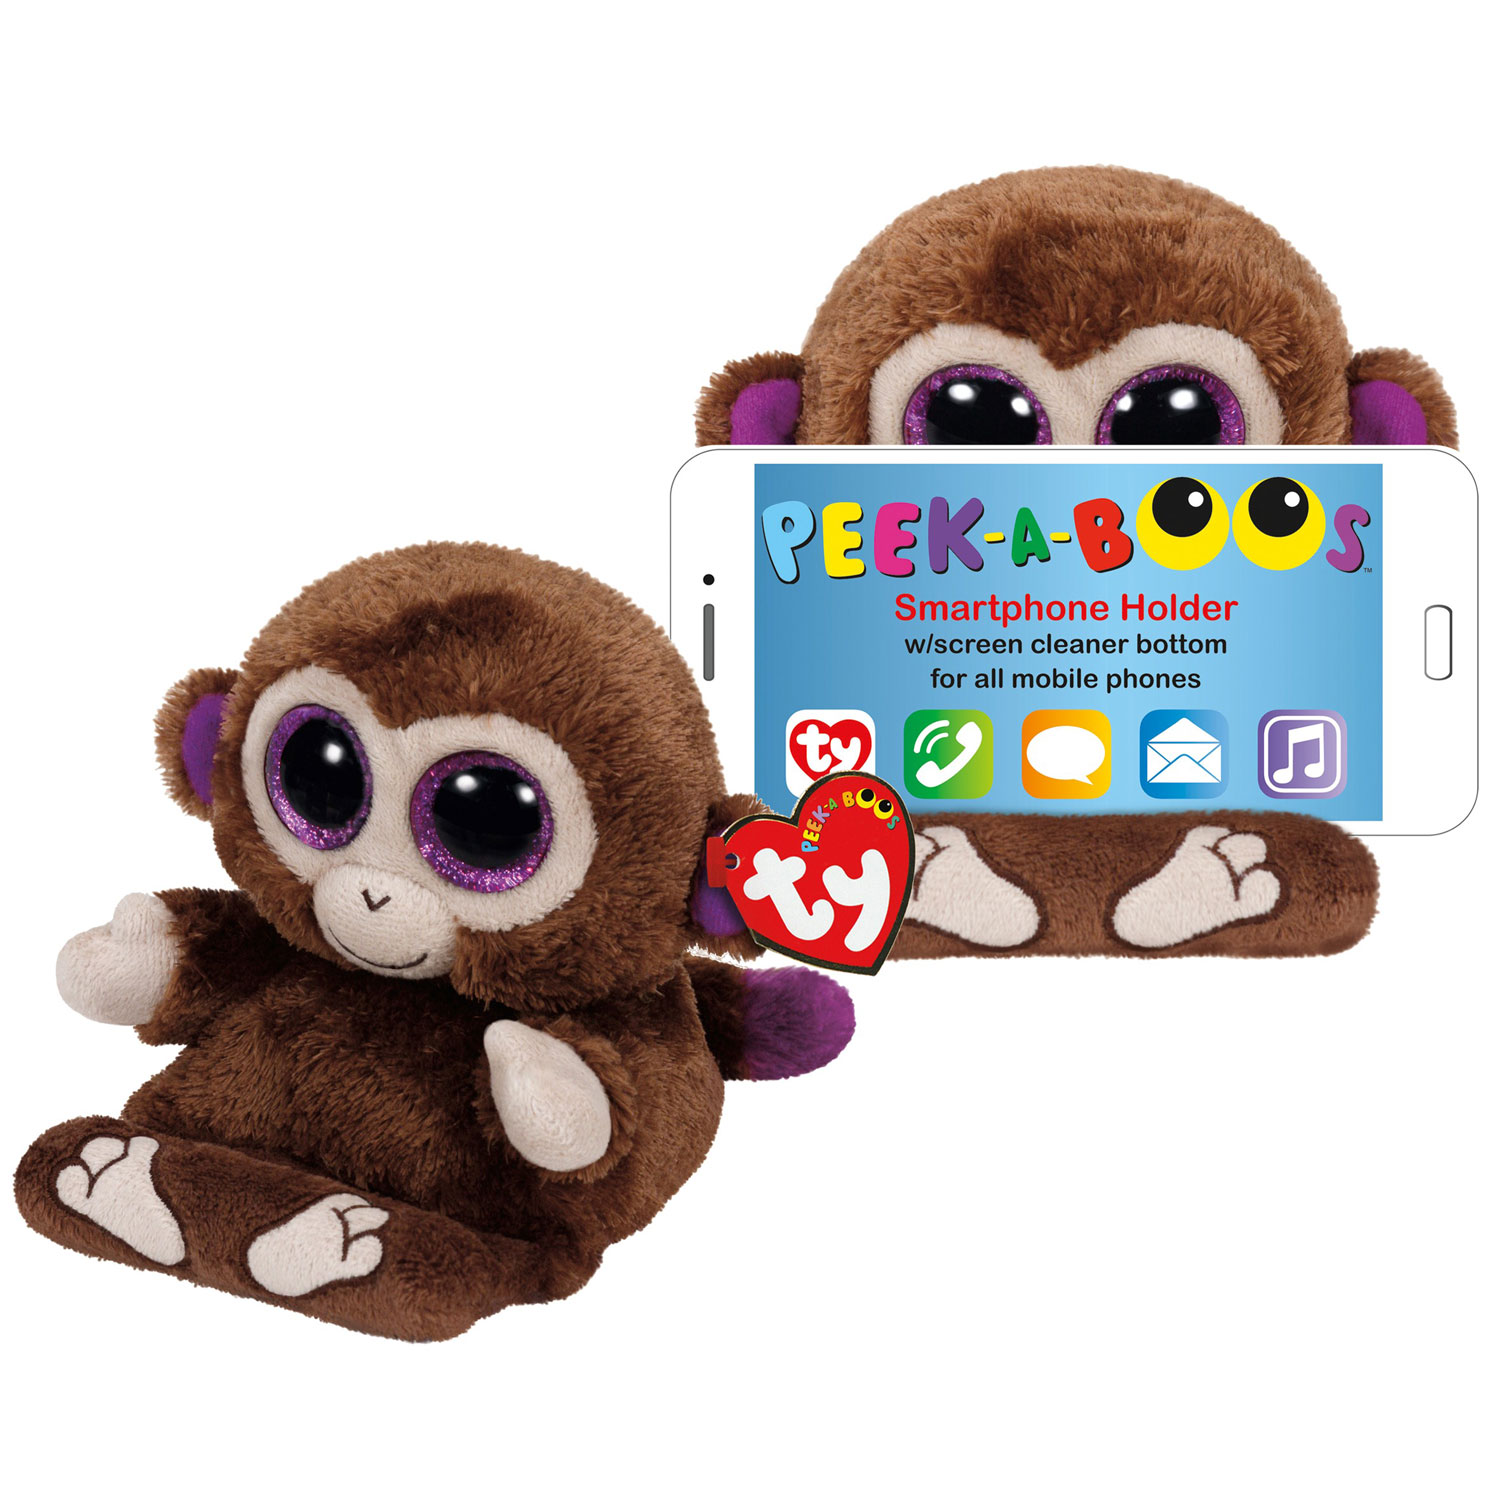 TY Beanie Boos Peek A Boos 4 inch CHIMPS the Monkey Phone Holder with Cleaner 